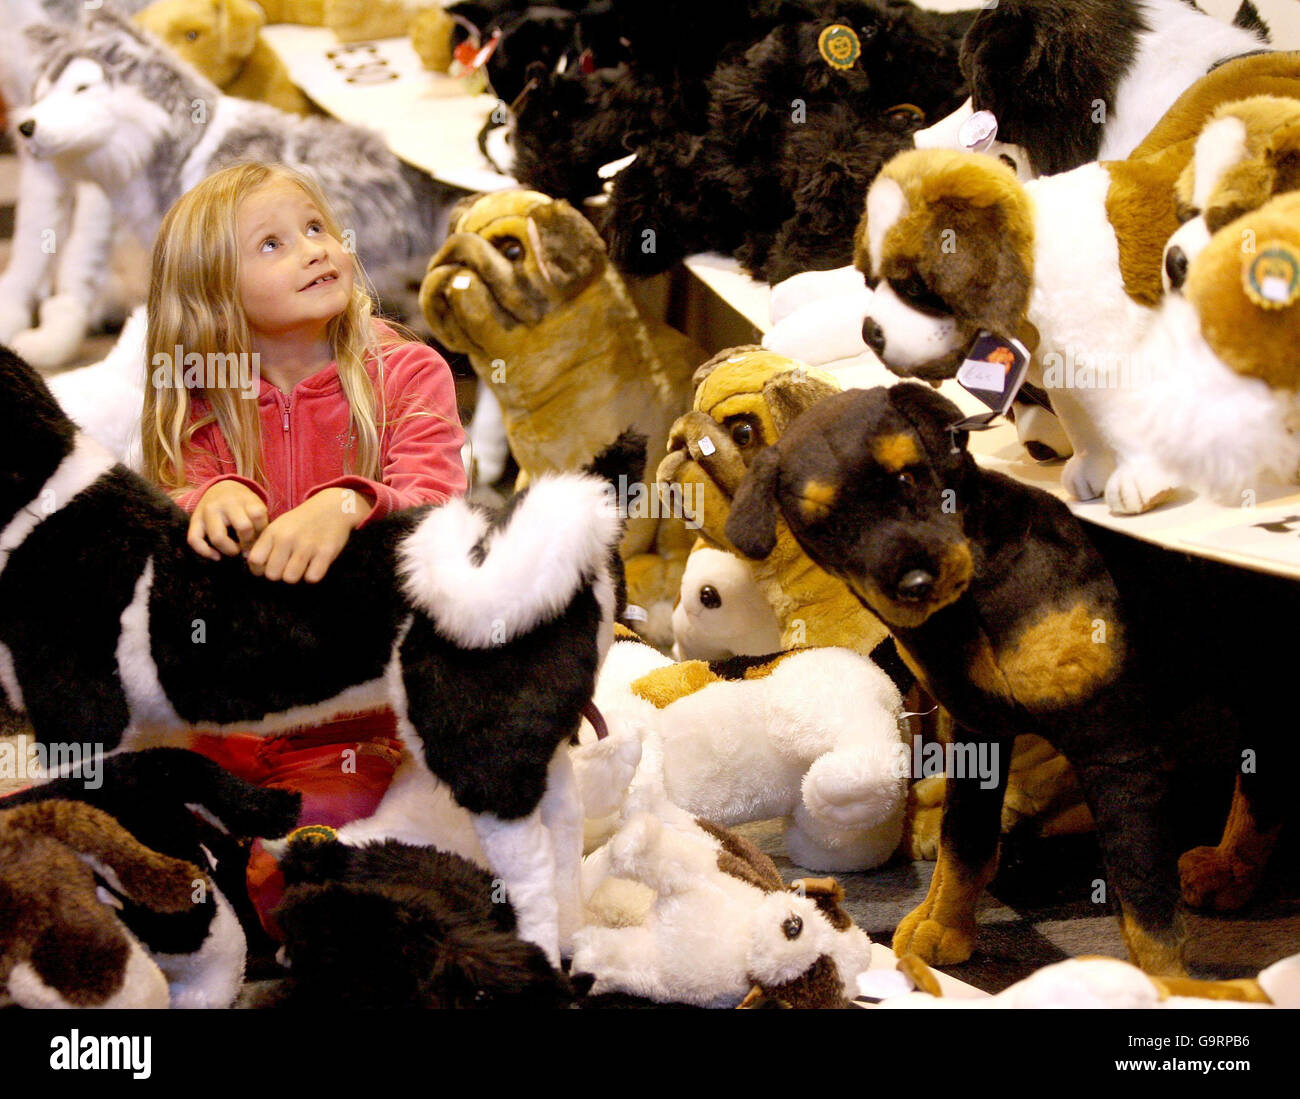 Grace Waddington, from Herefordshire, chooses a toy dog as a gift for her eighth birthday tomorrow during Crufts 2007 at the NEC in Birmingham. Stock Photo